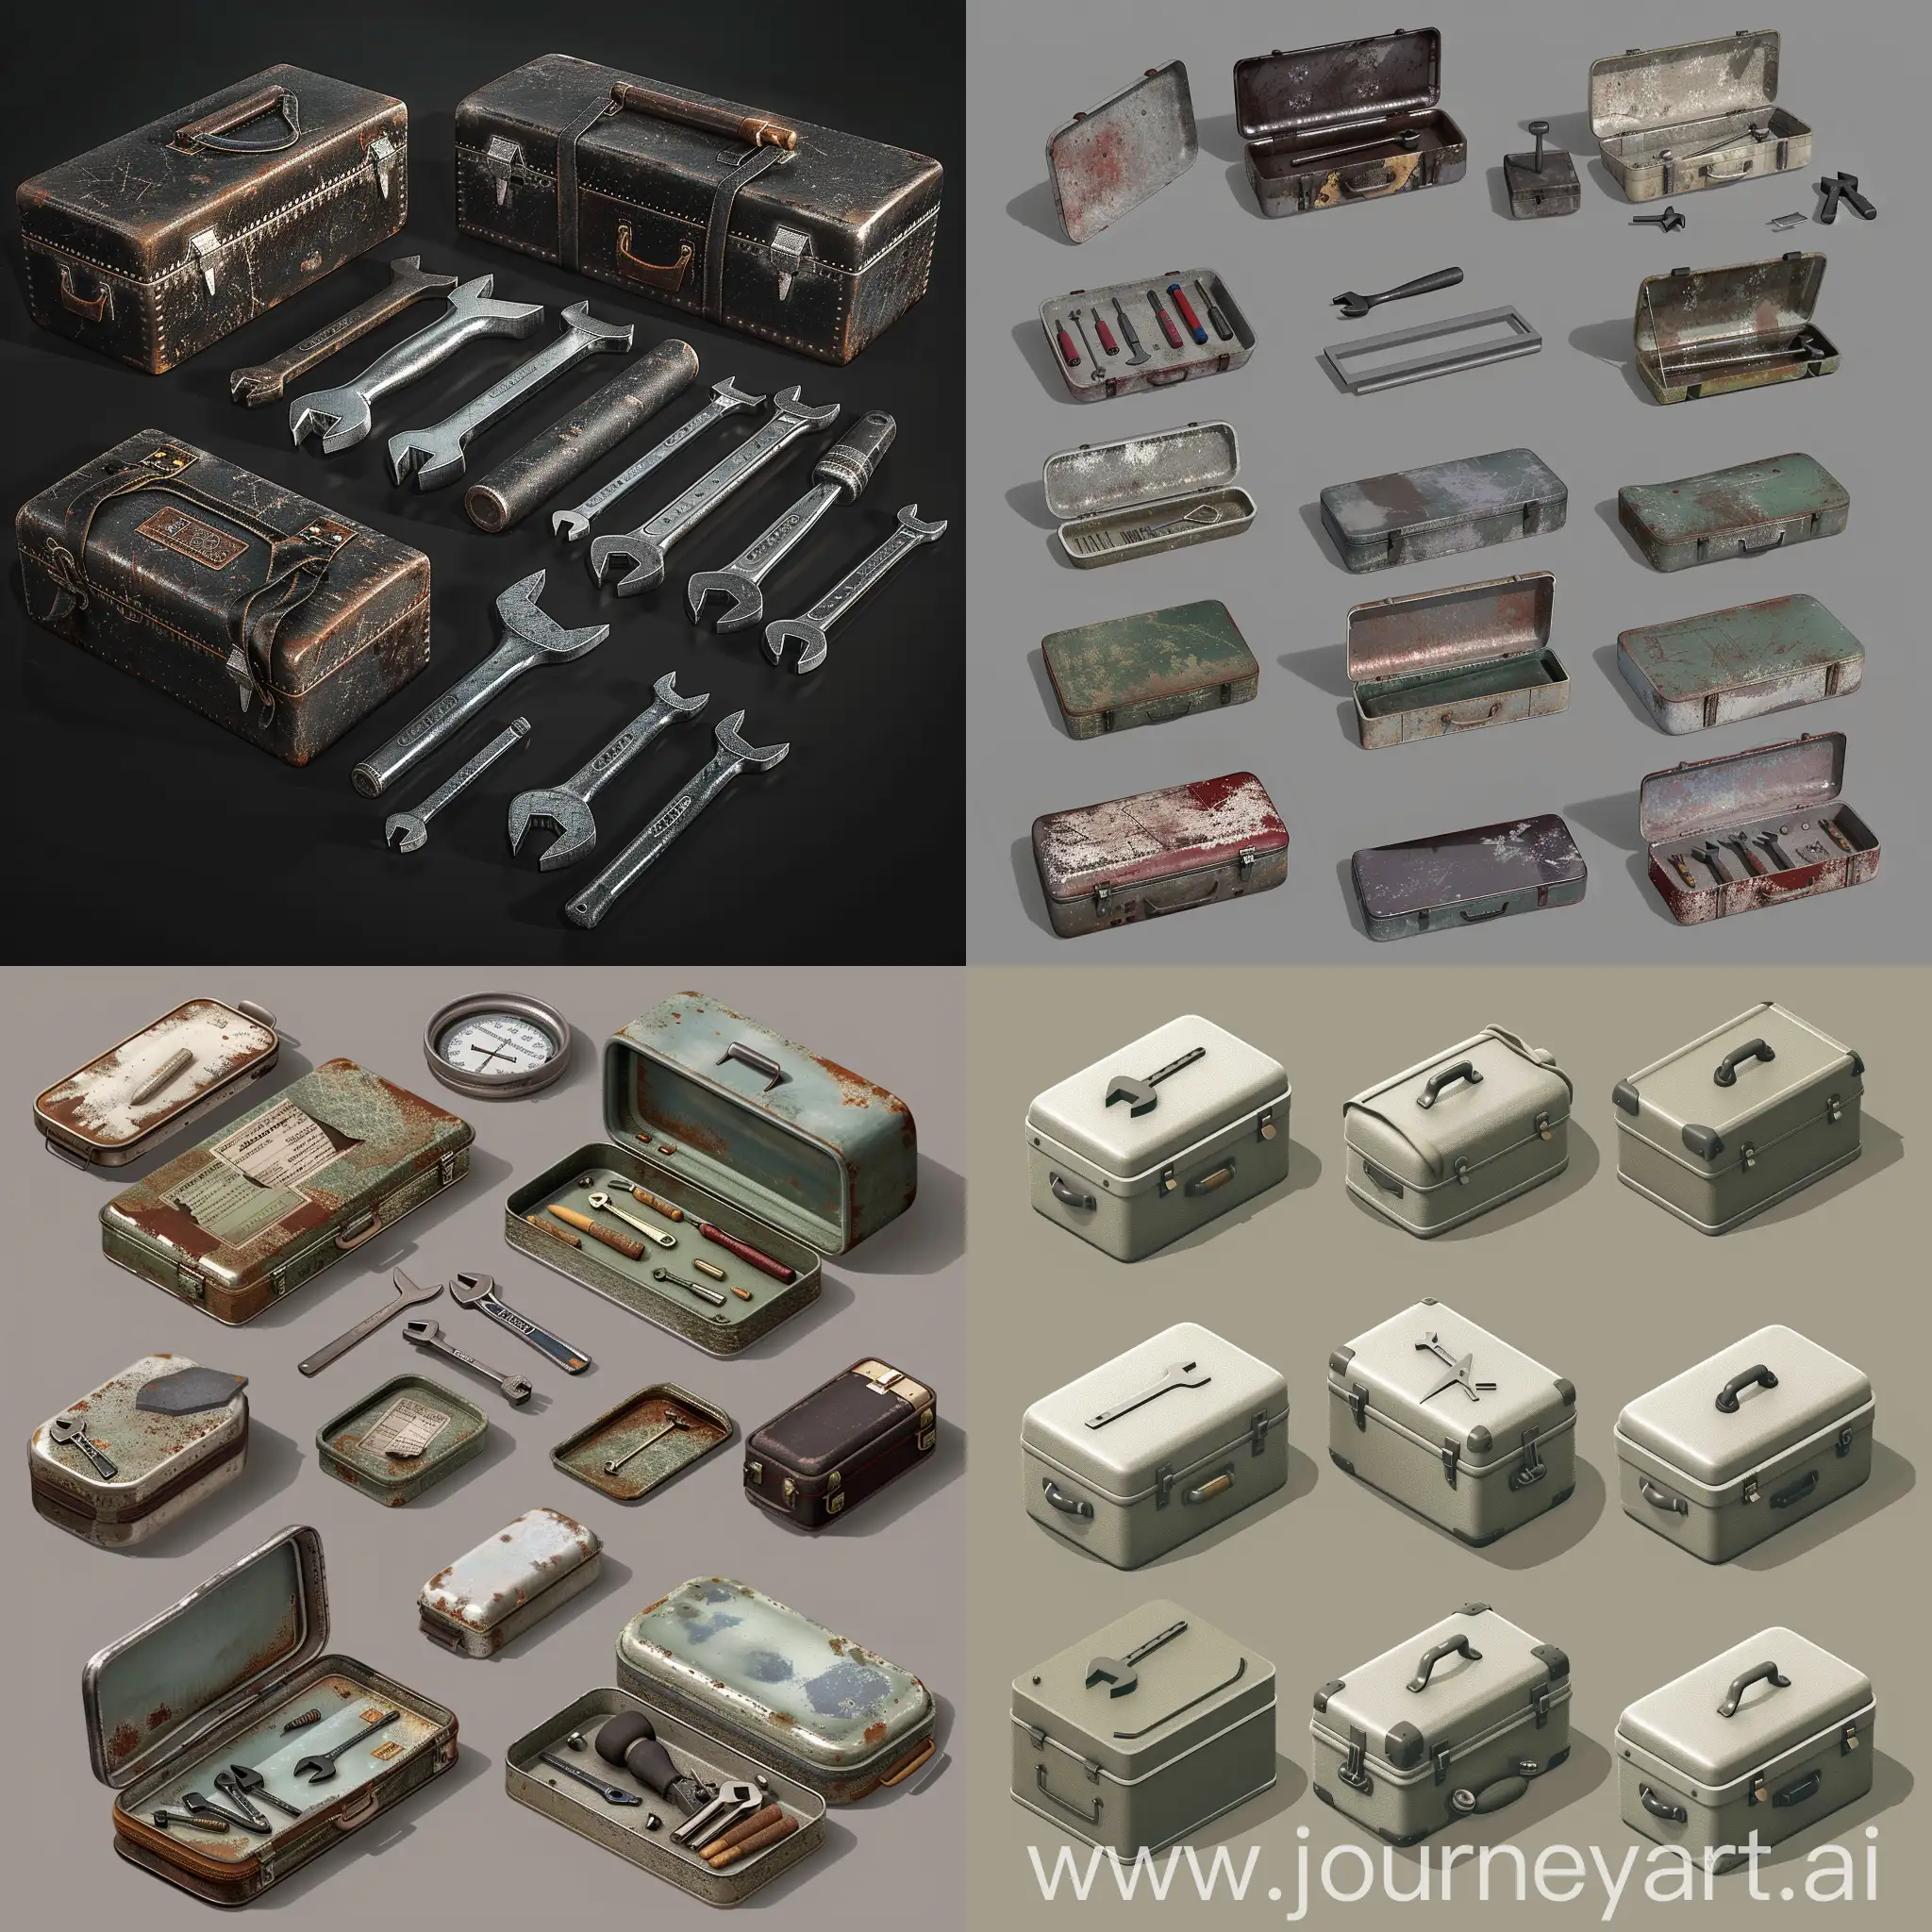 Isometric-Set-of-Realistic-Old-Worn-Repair-Tool-Kit-Instruments-in-Blender-3D-Style